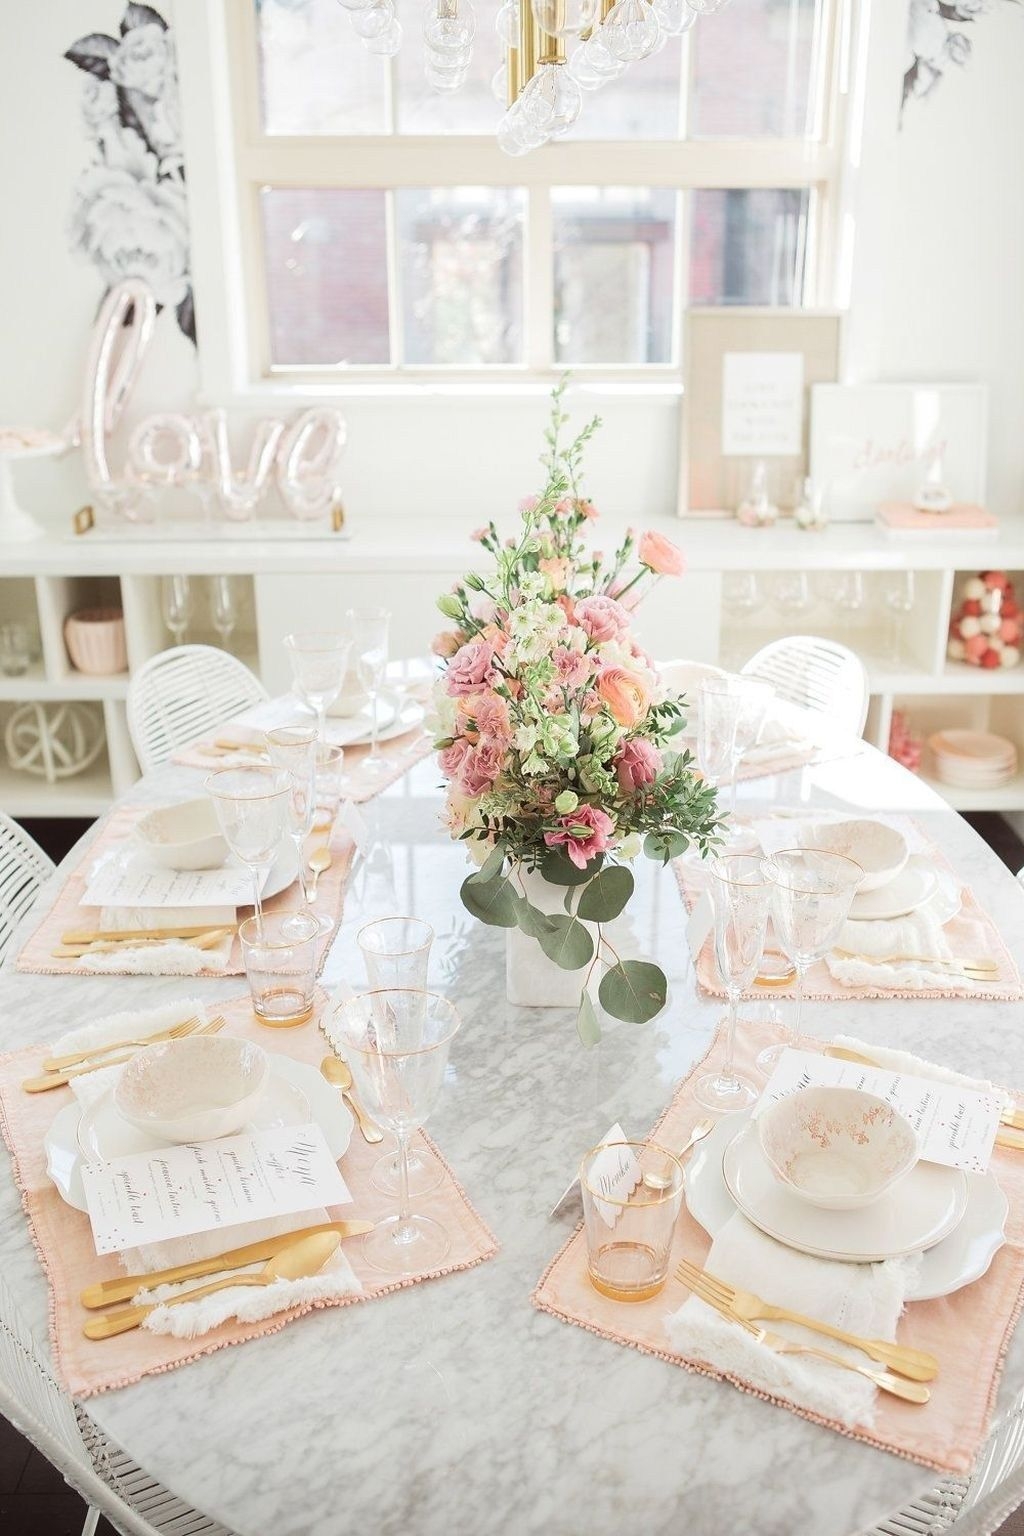 Most Inspiring Valentine’s Day Simple Table Decoration Ideas 16